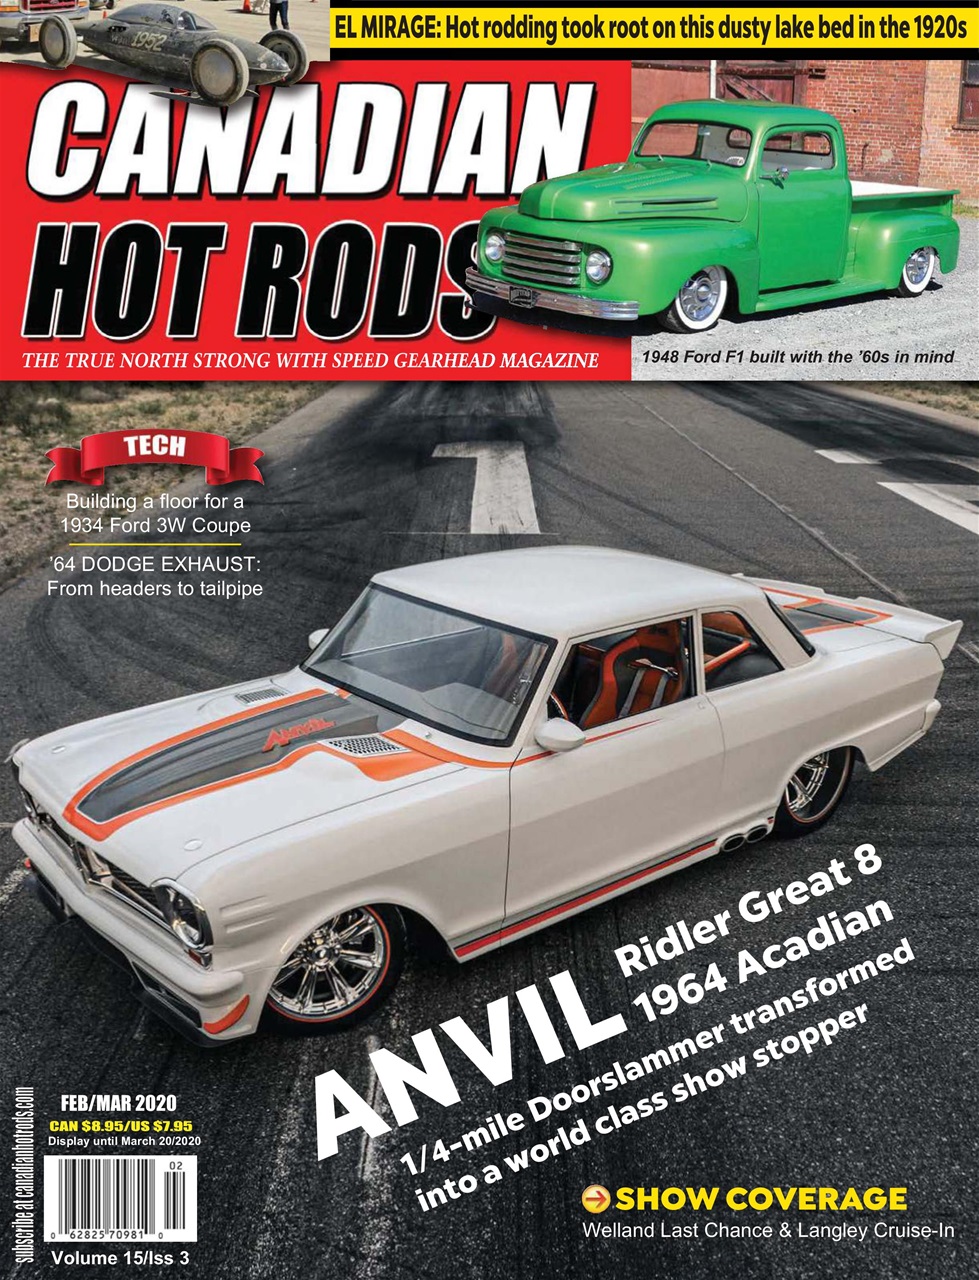 Canadian Hot Rods Magazine - Feb/March 2020